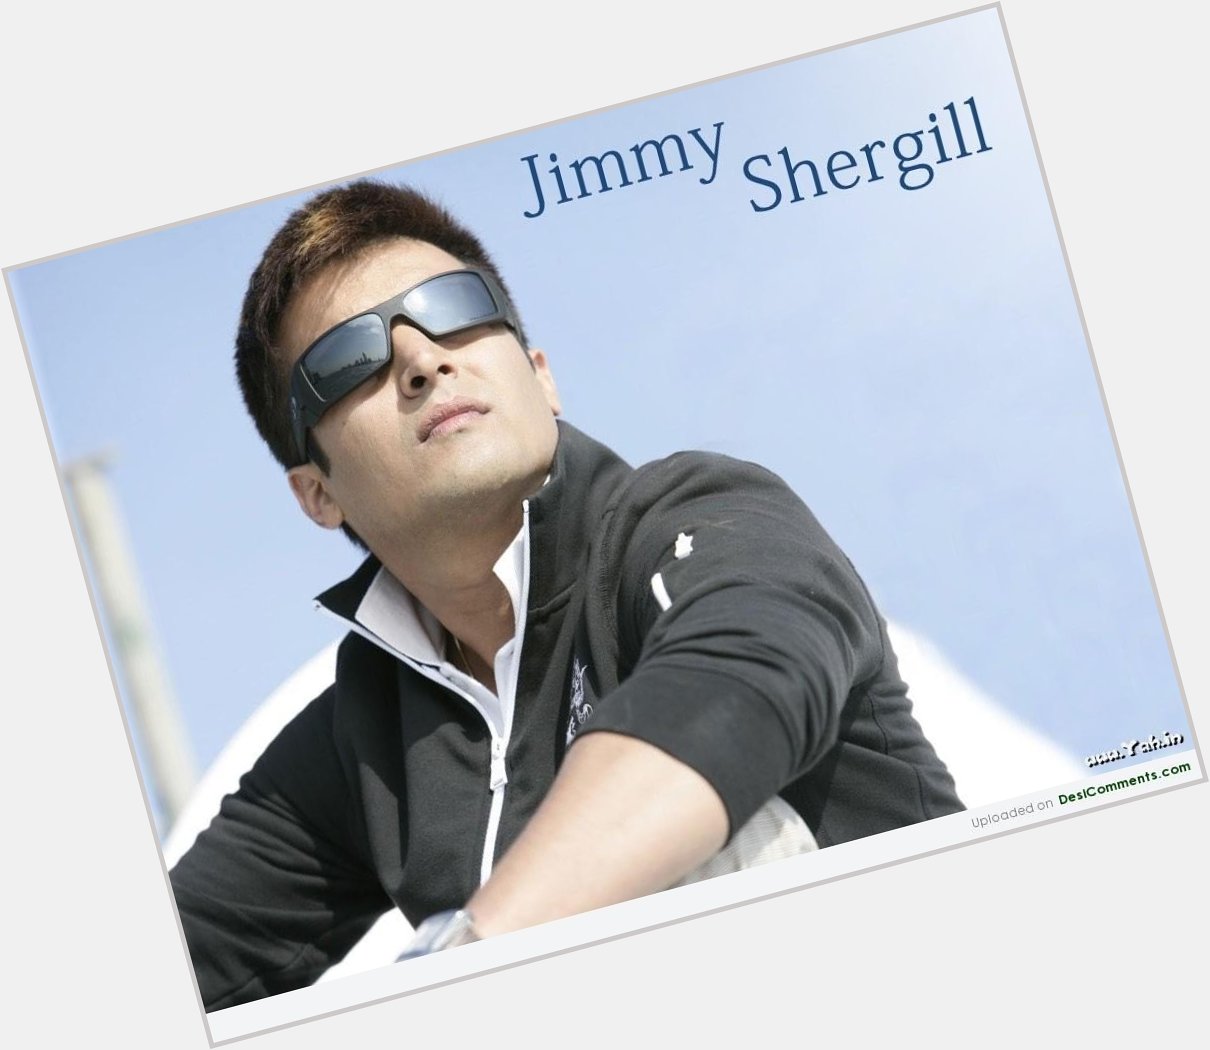 \"Happy Birthday\"

Jimmy Shergill (Born 3 Dec 1972) is an Indian actor who works in Hindi and Punjabi films. 